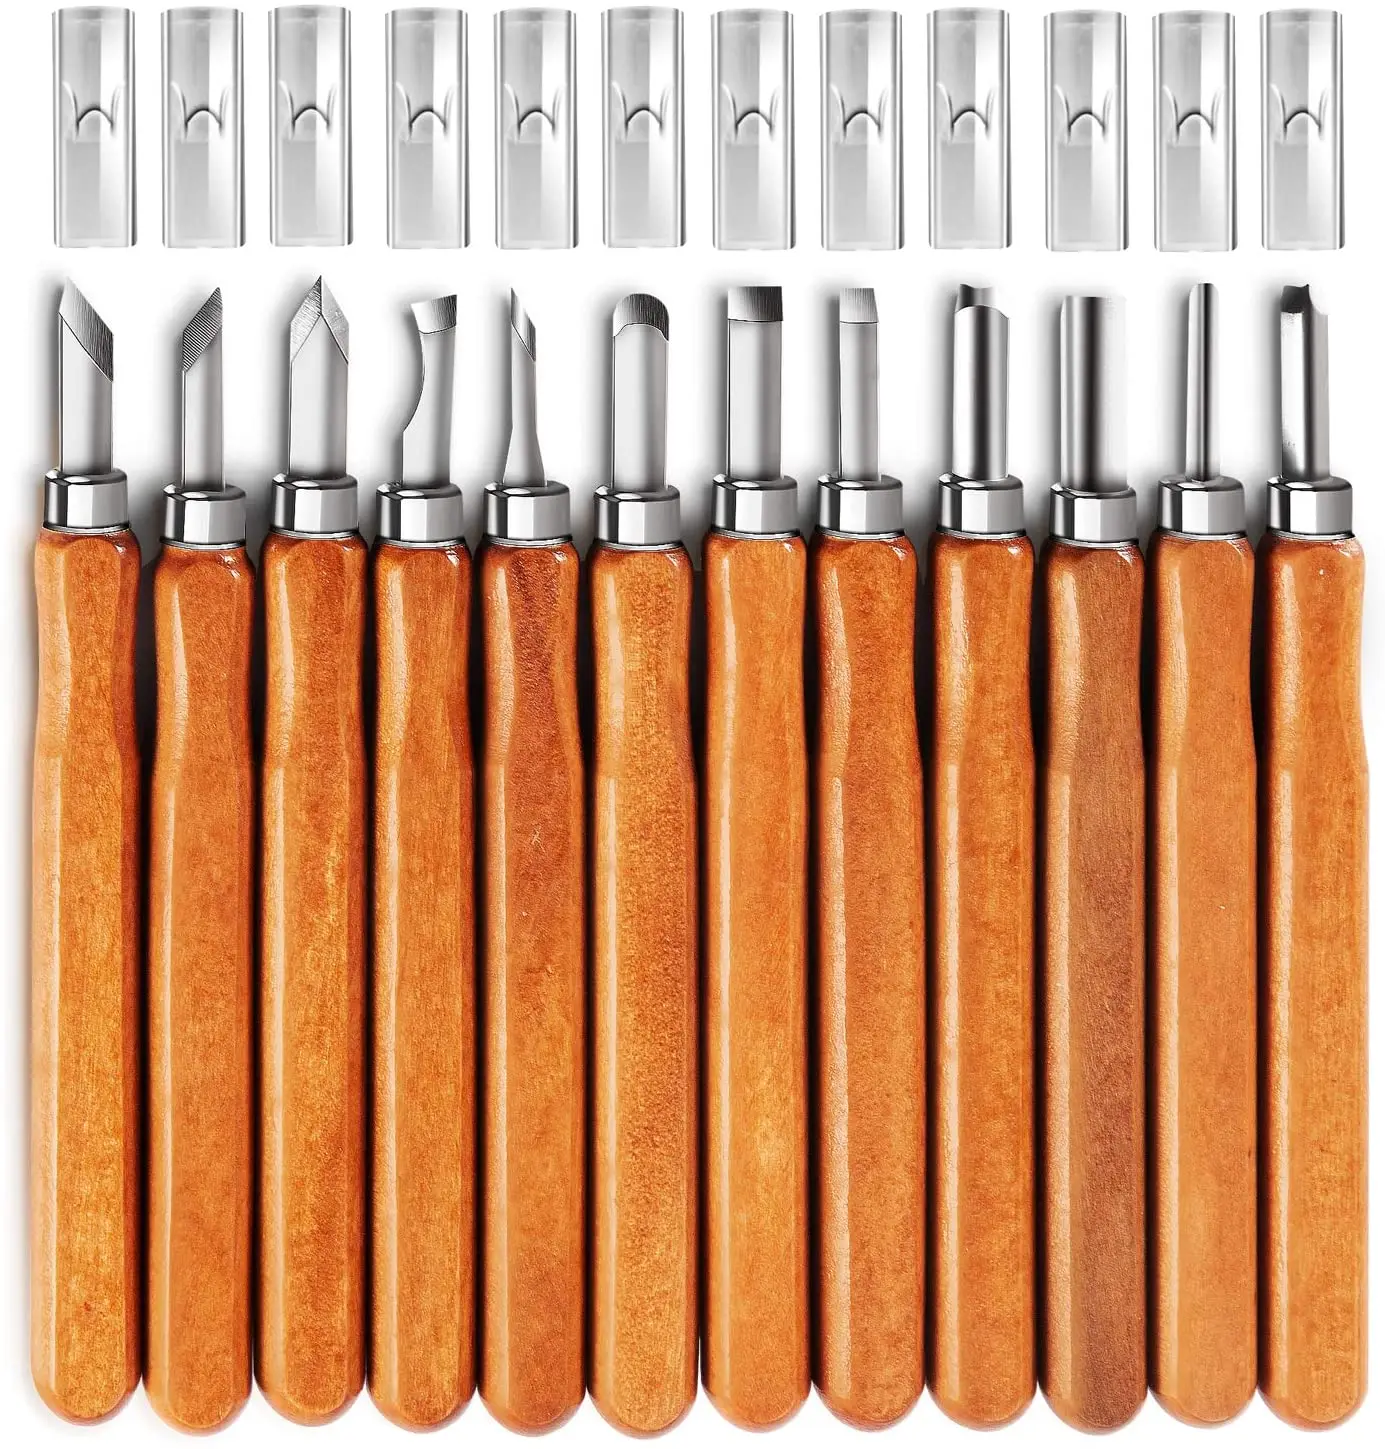 Vibratite Wood Carving Knives Kit 12 Set Carbon Steel Knife Kit For Kids Beginners With Reusable Pouch Buy Wood Carving Tools Hand Carving Knife Set Product On Alibaba Com